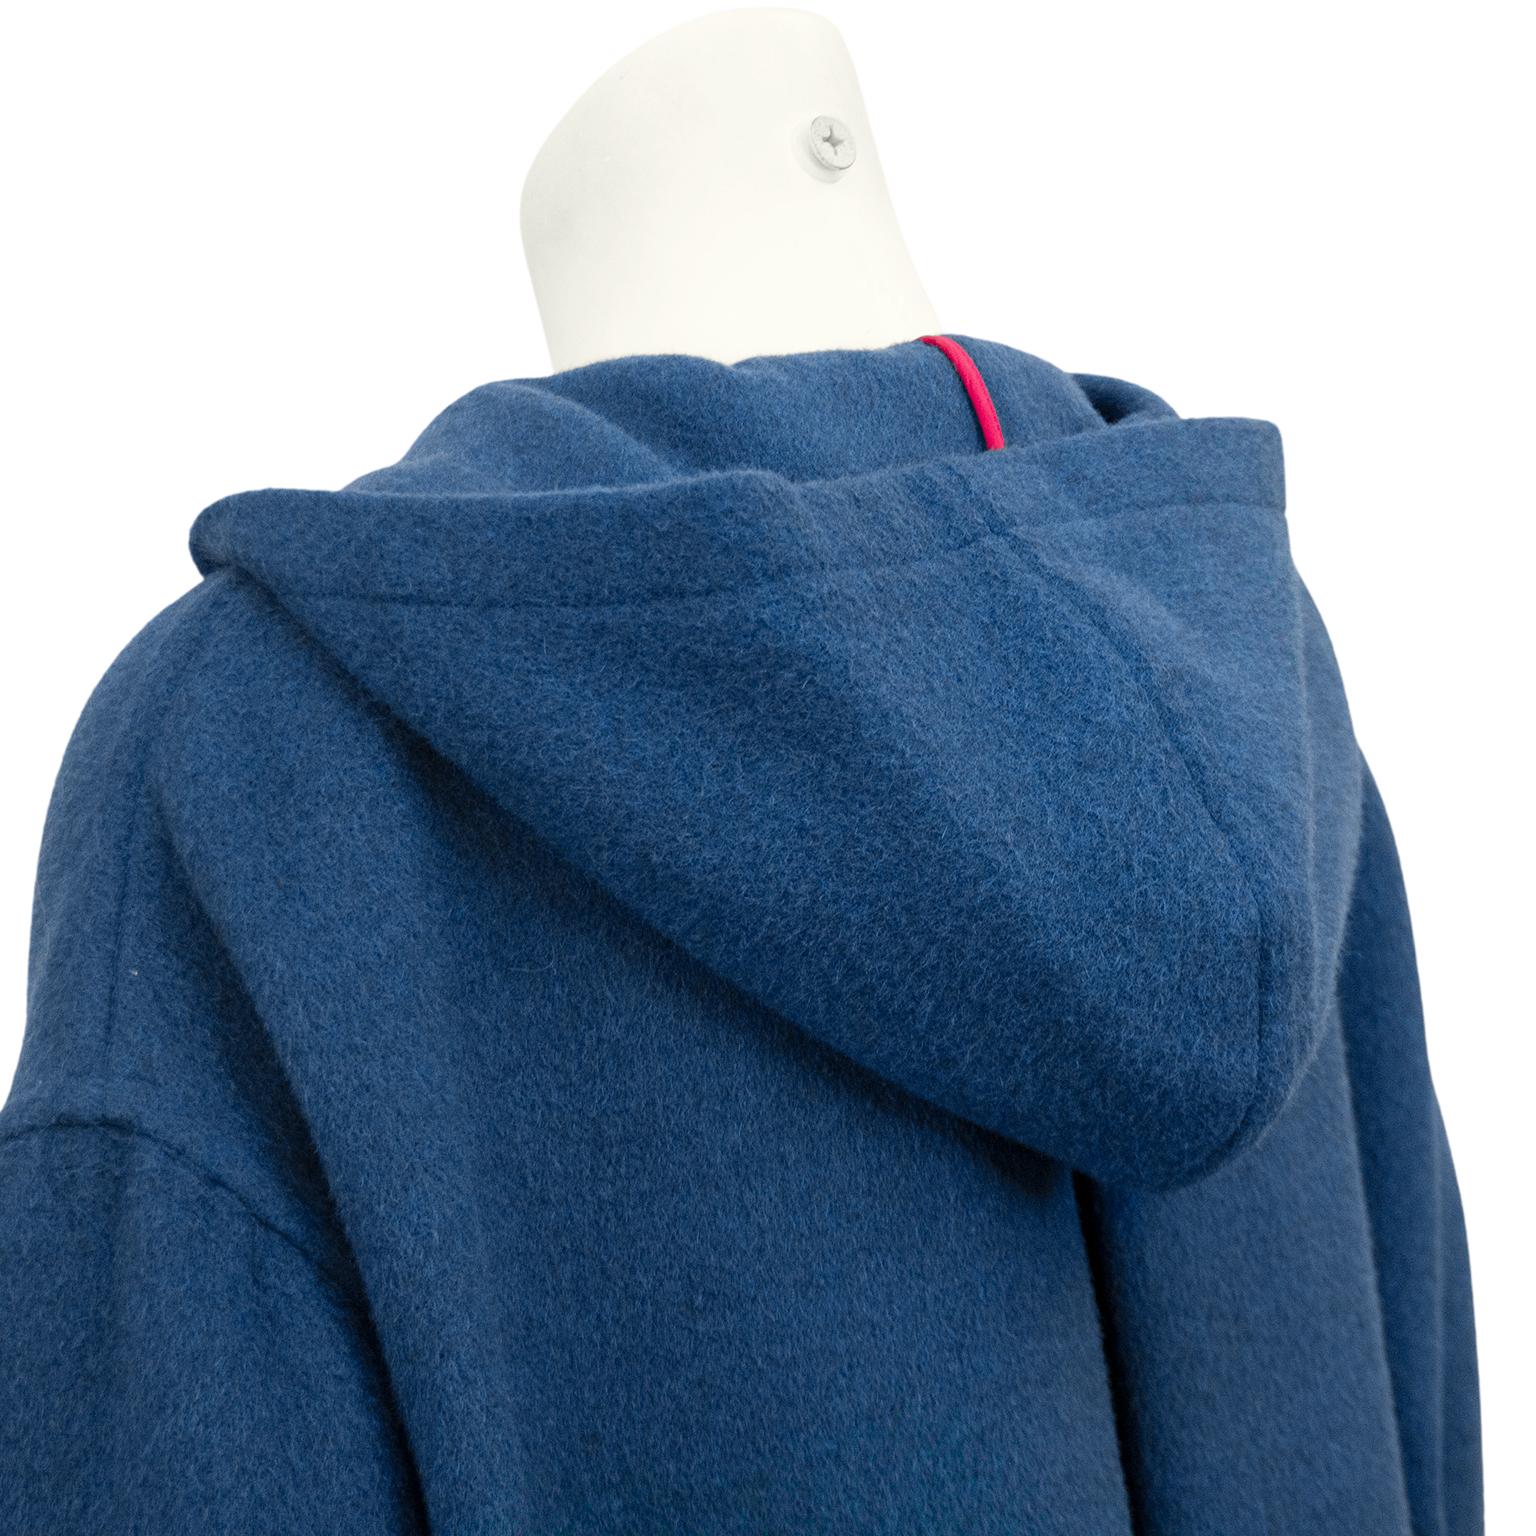 Women's or Men's 1980s Geoffrey Beene Teal Blue, Rose Trimmed Wool Coat with Hood  For Sale